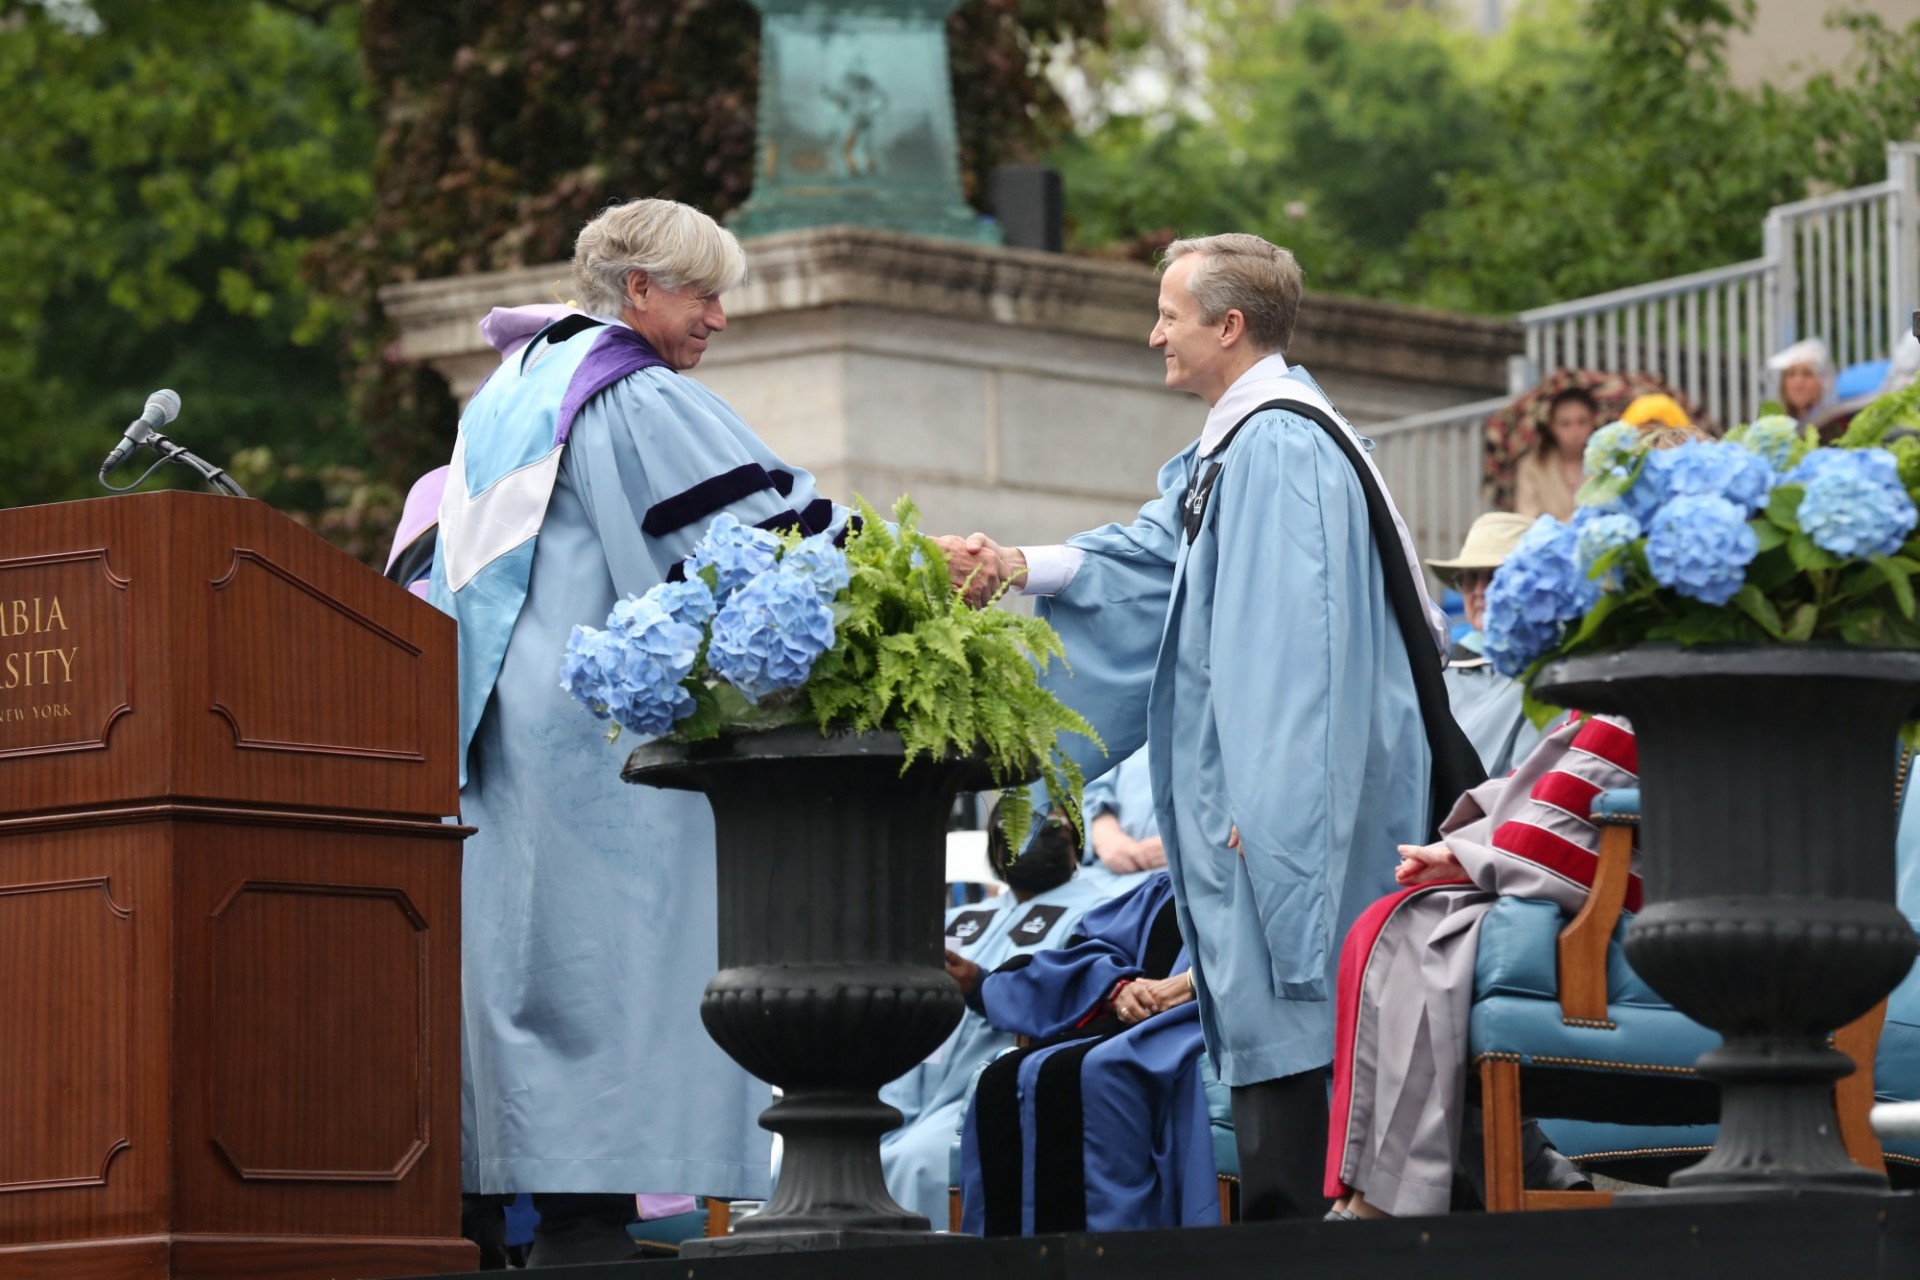 IPresident Bollinger shakes David M. Greenberg's hand during Commencement.  Both are wearing Commencement regalia.  